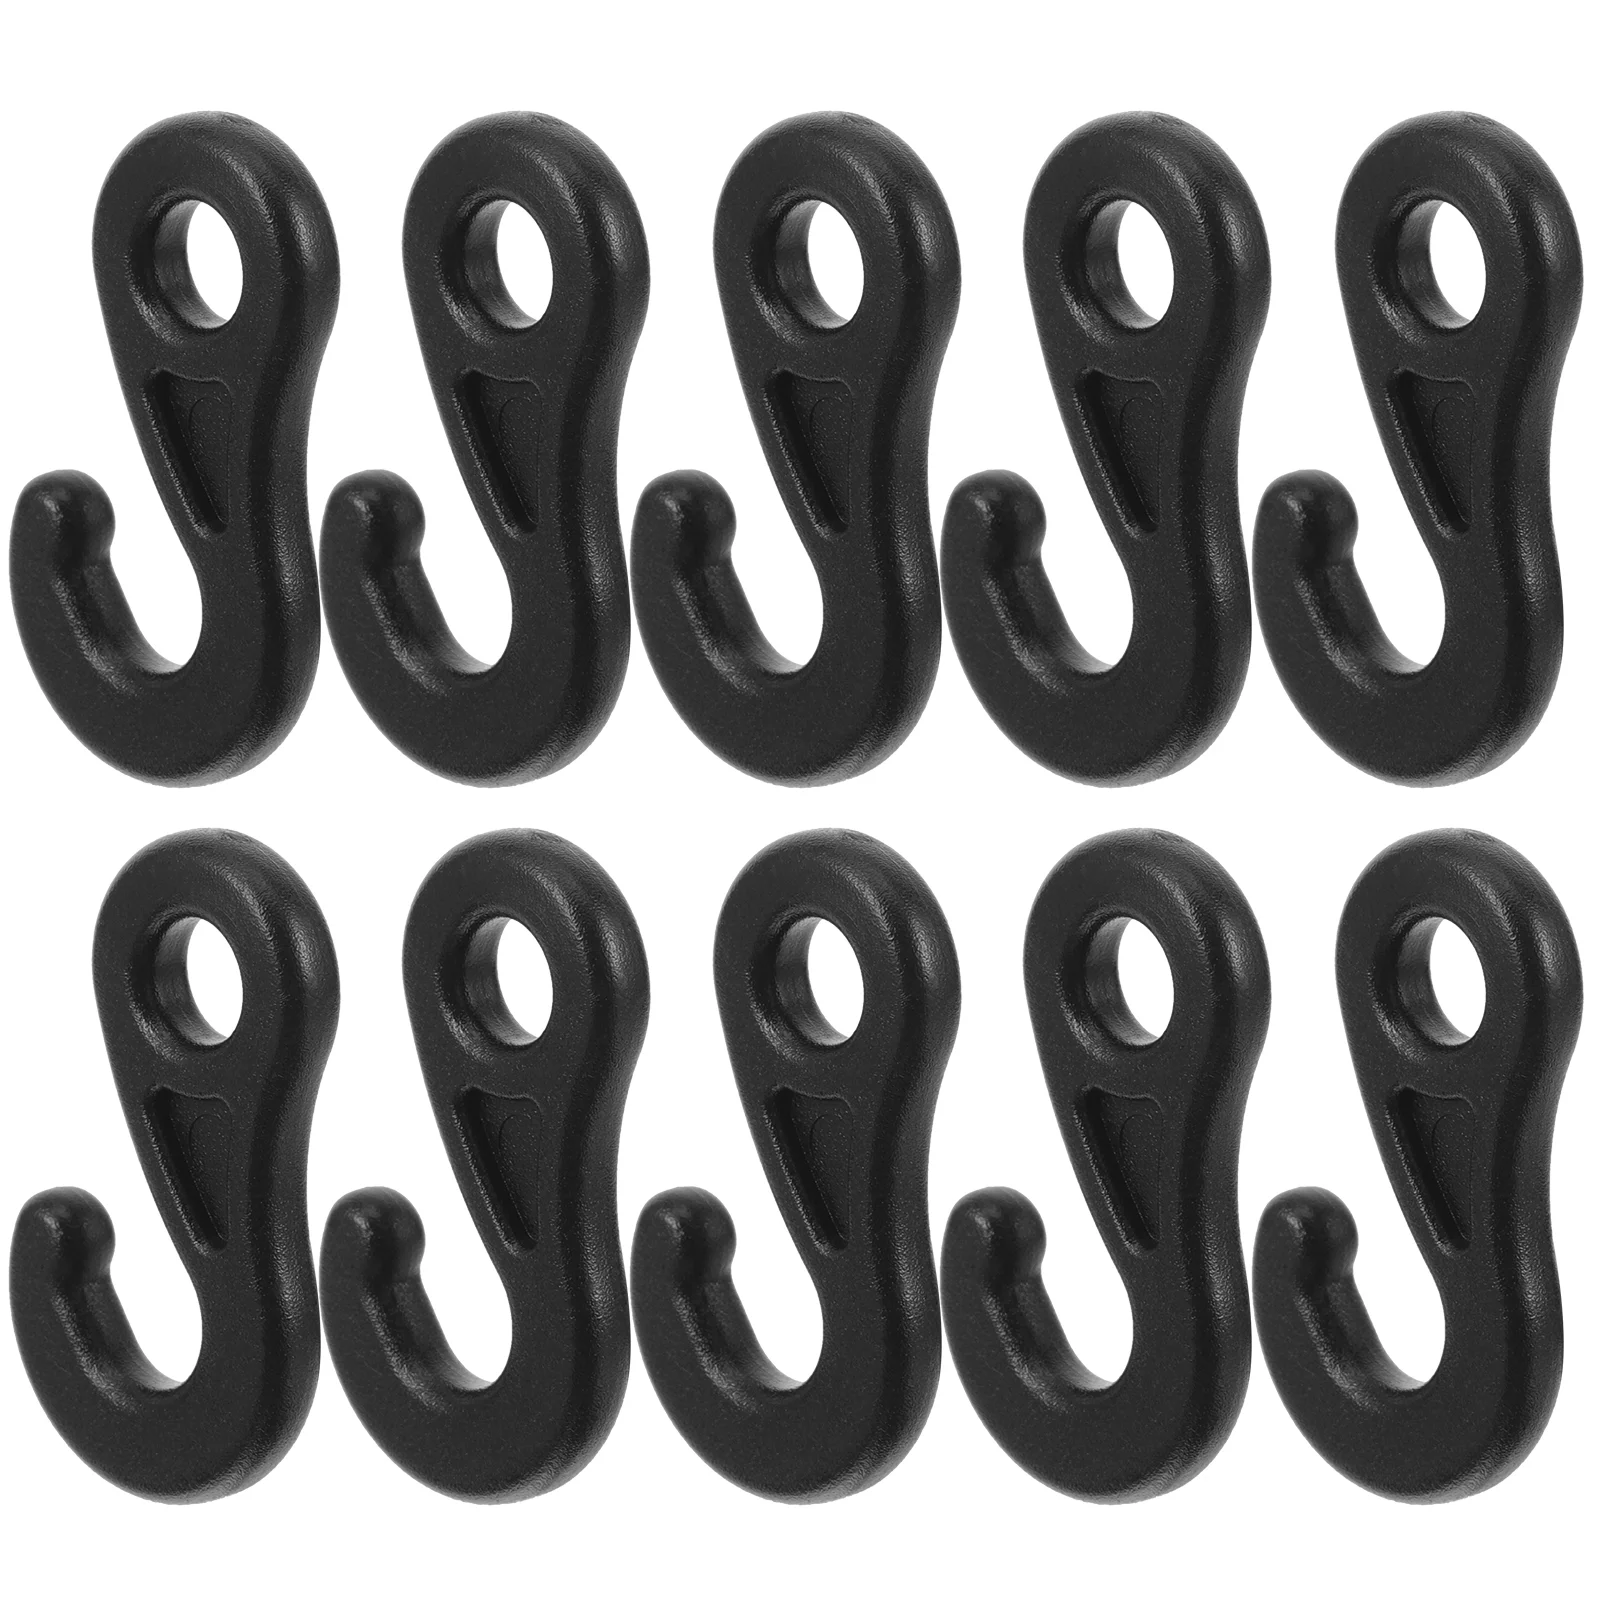 

10 Pcs Outdoor Canopy Tent Question Mark Light Hook Ground Nail Wind Rope Connection Pom9 10pcs (black) Durable Hooks Tightener